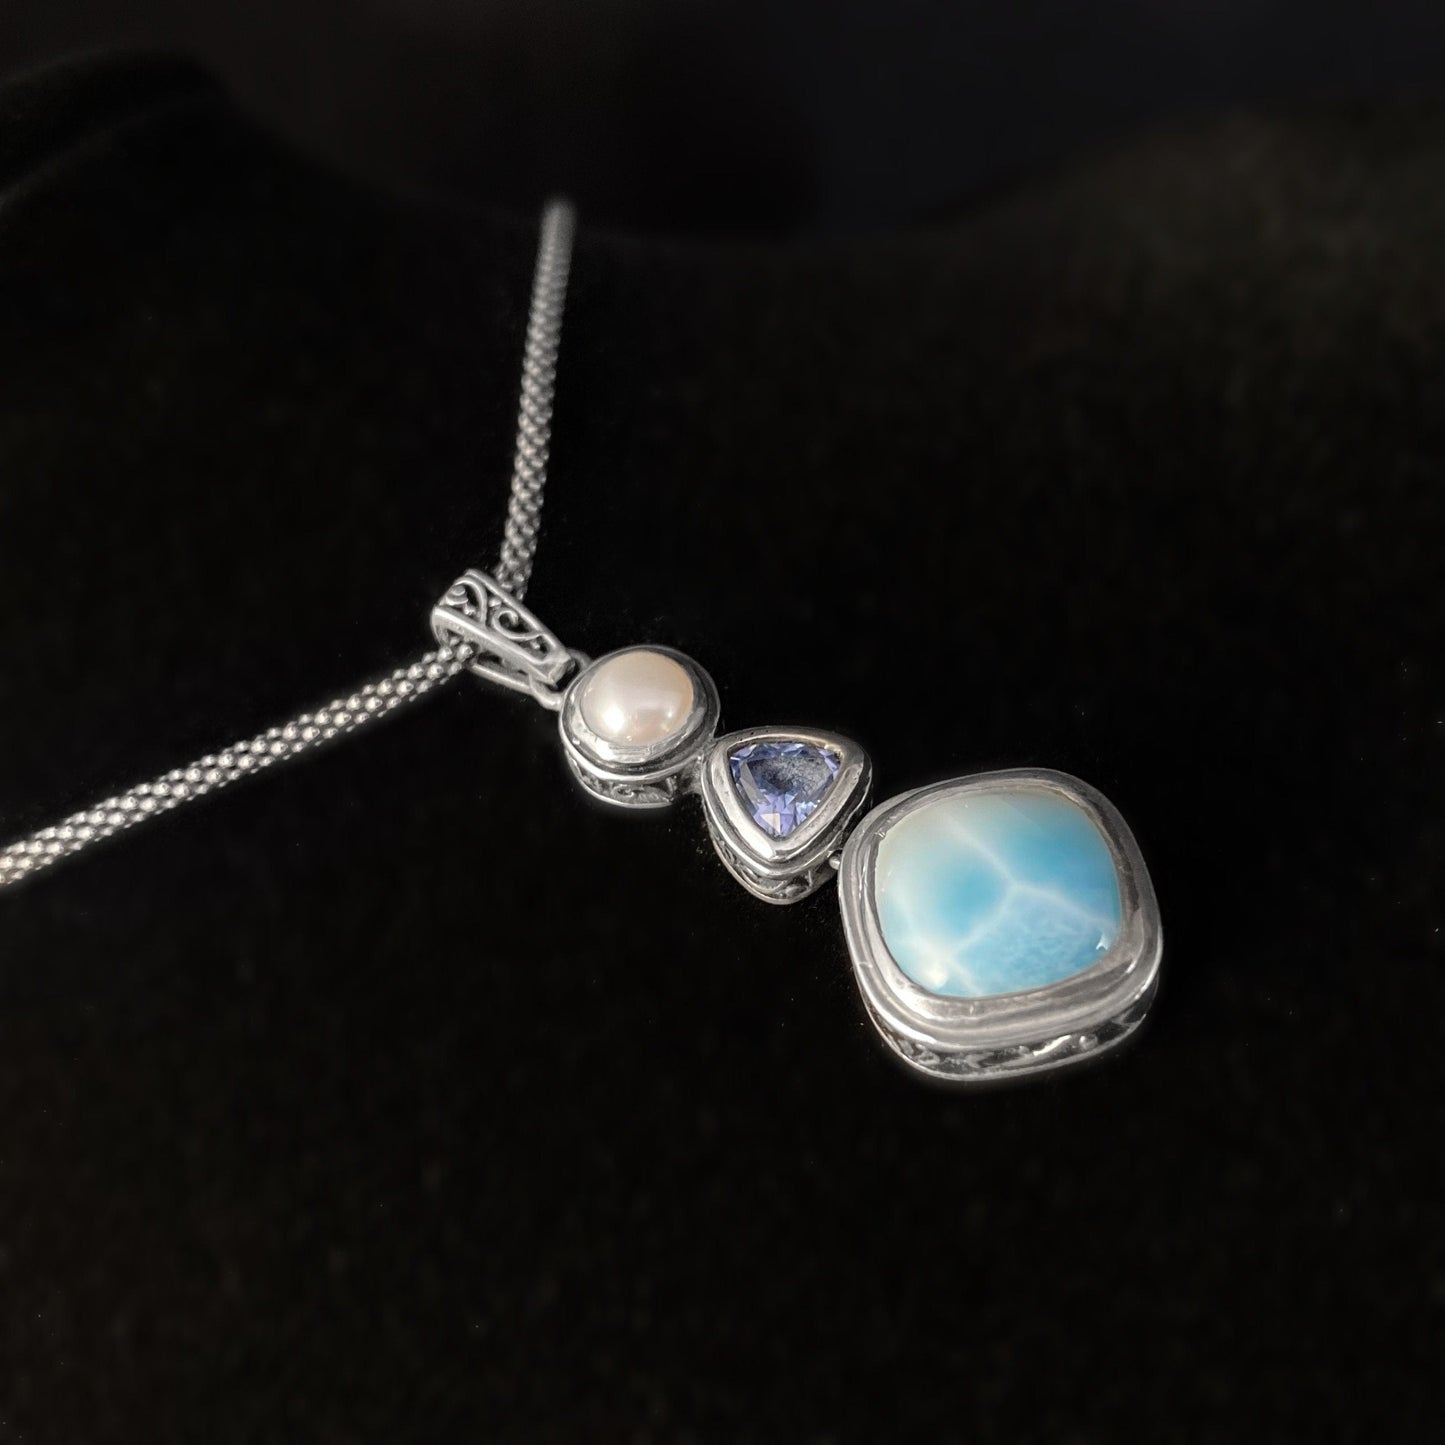 Marahlago Larimar and Sterling Silver Azure Necklace